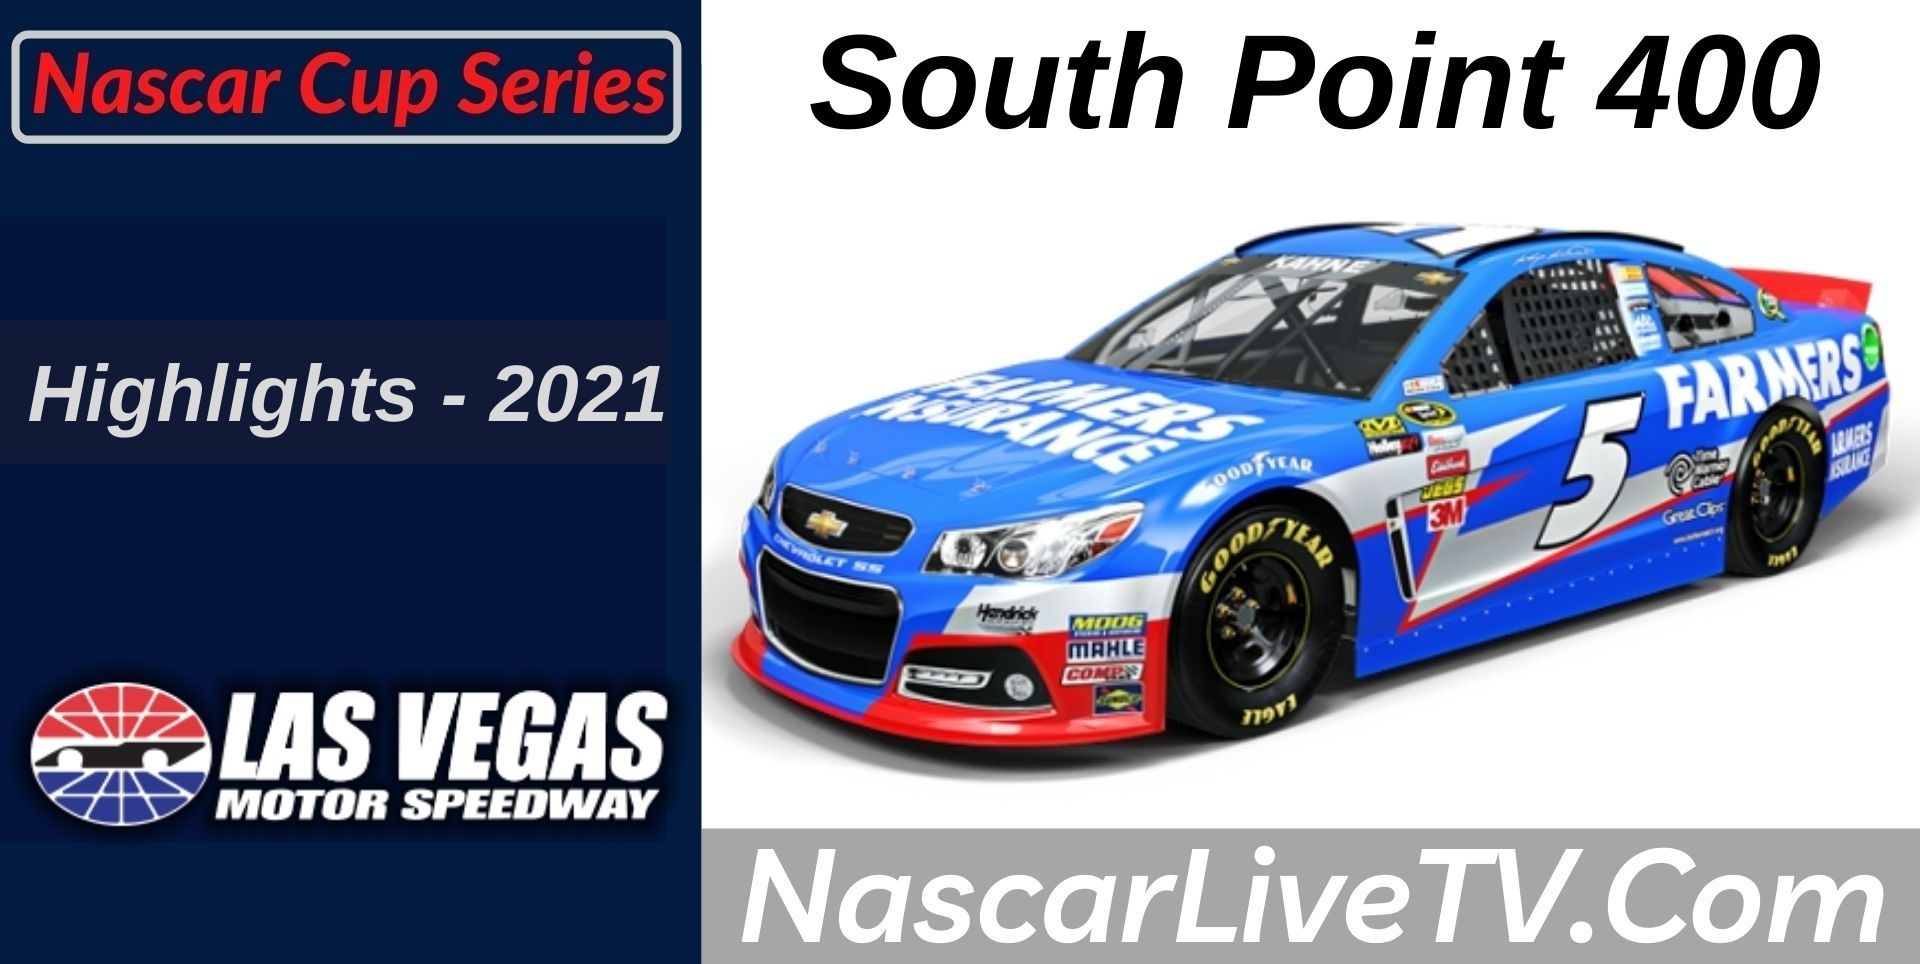 South Point 400 Highlights NASCAR Cup Series 2021